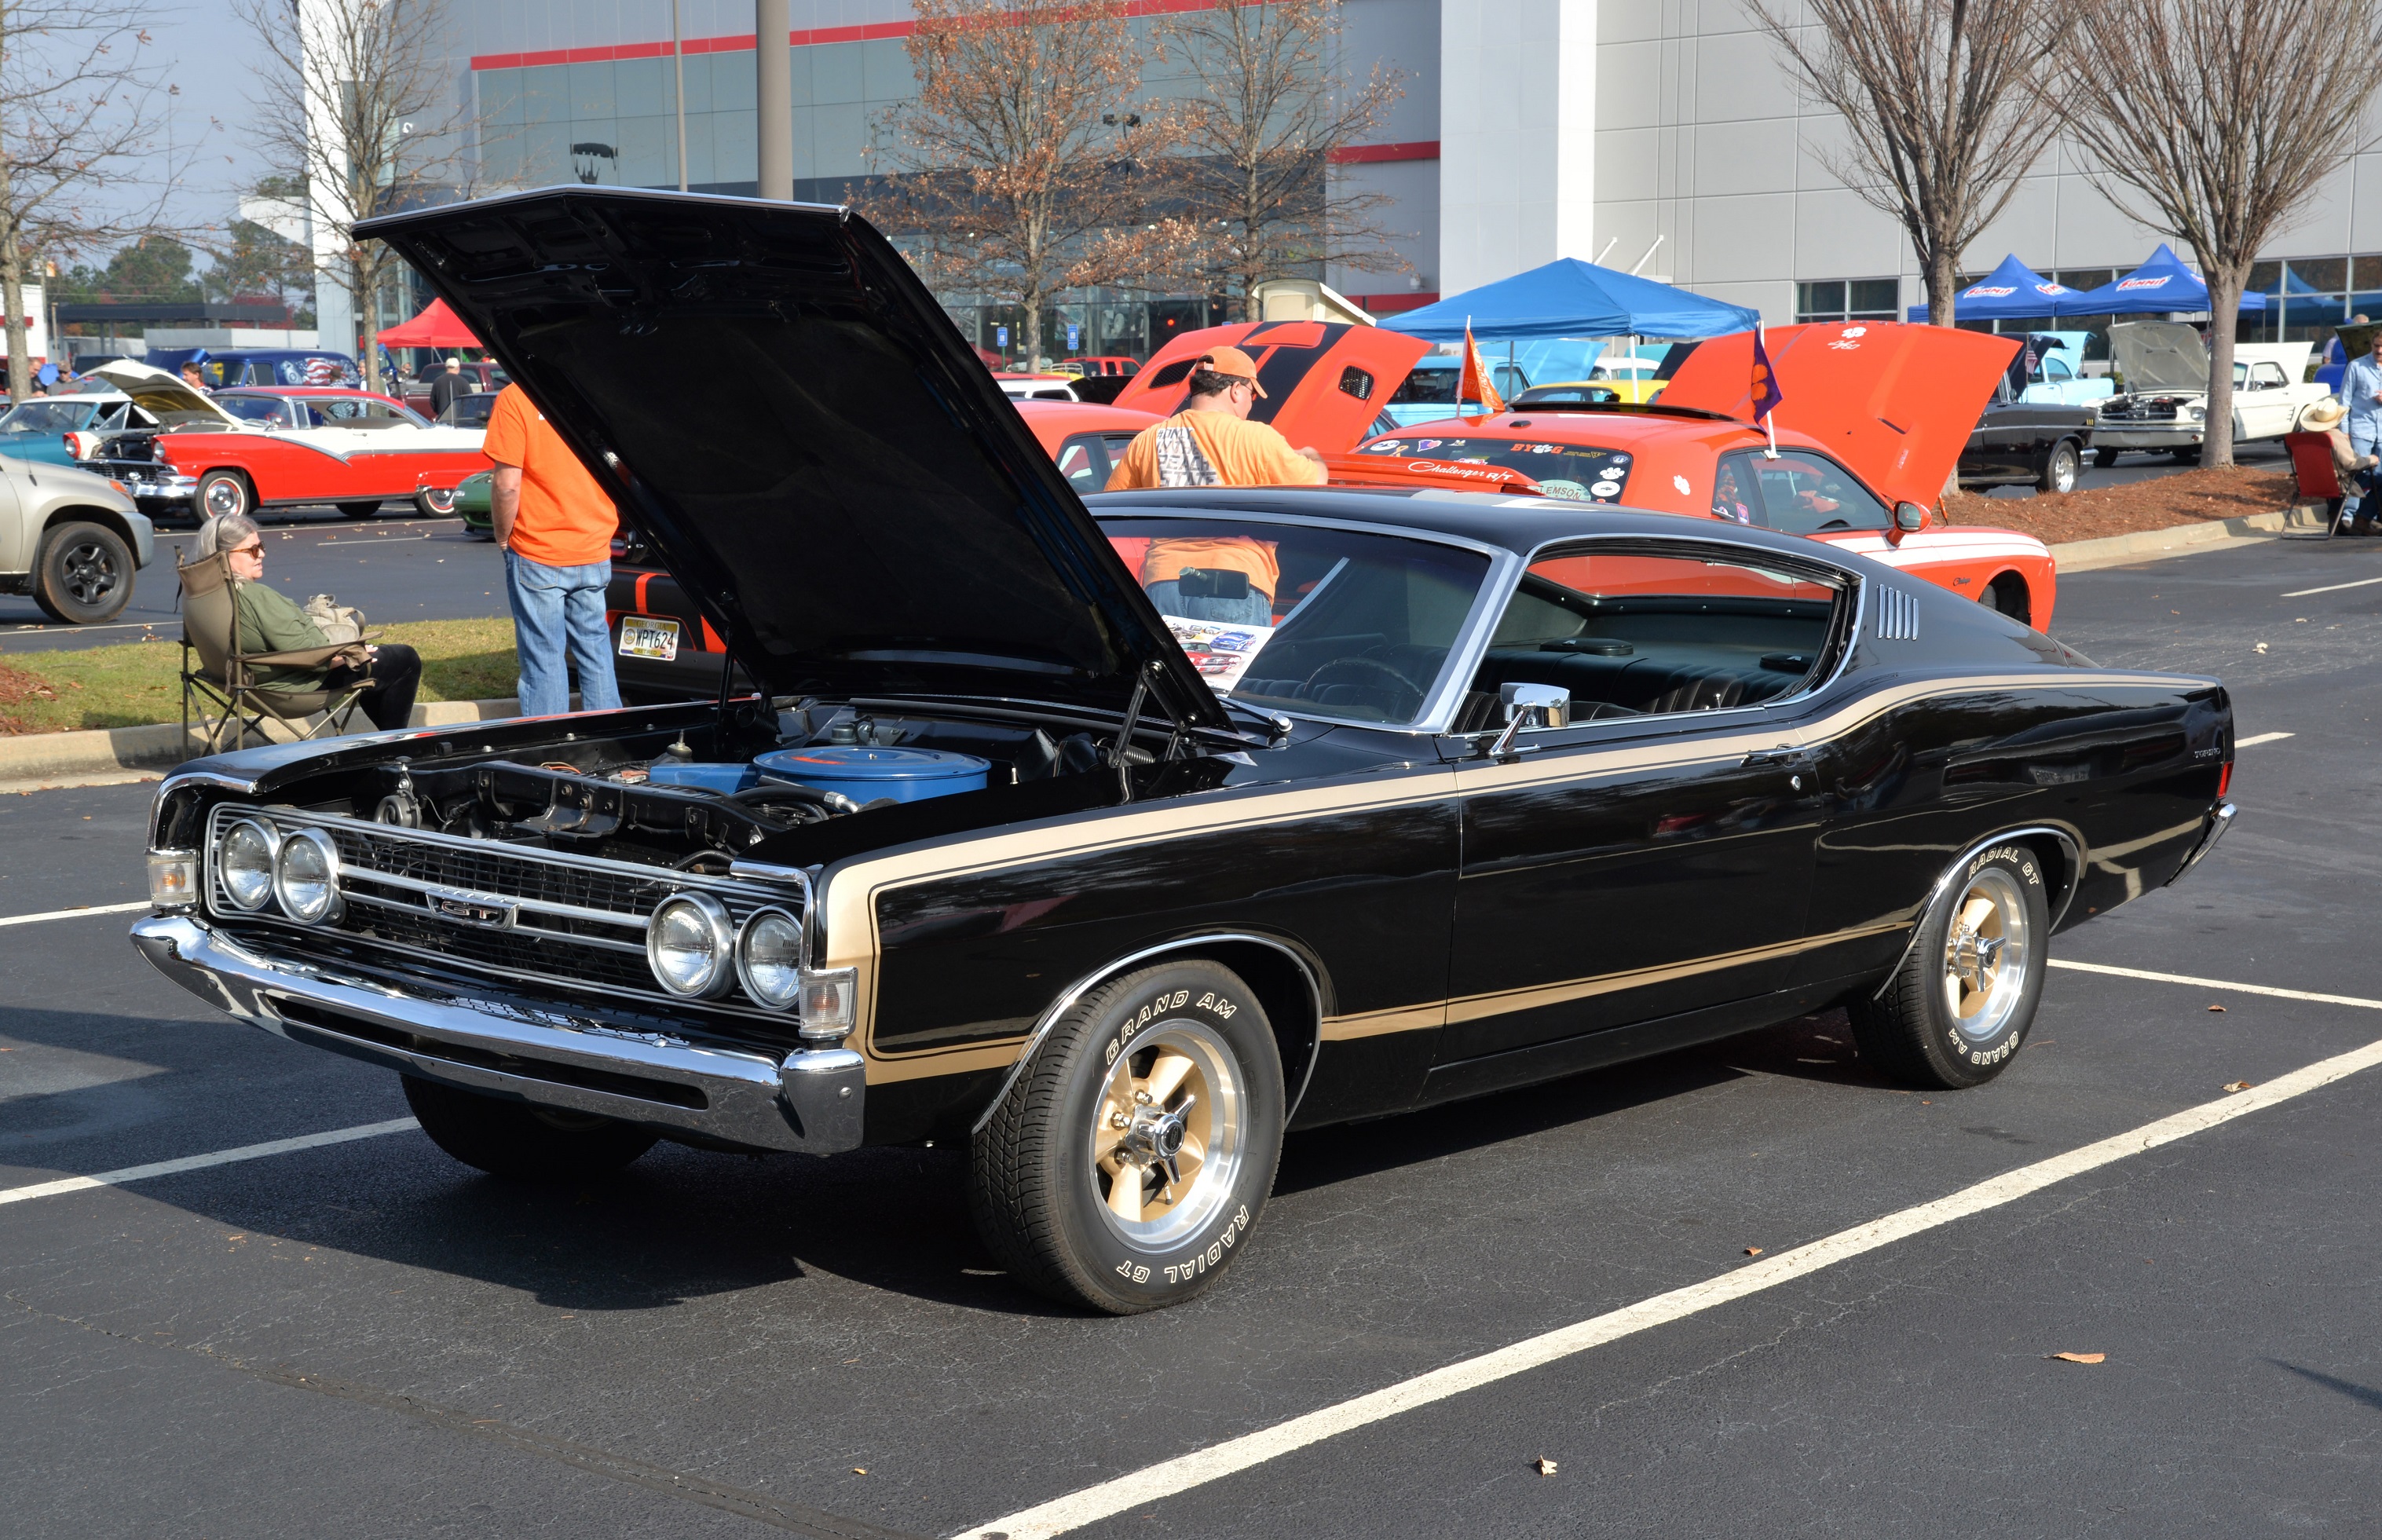 Toys for Tots Cruise In Torino